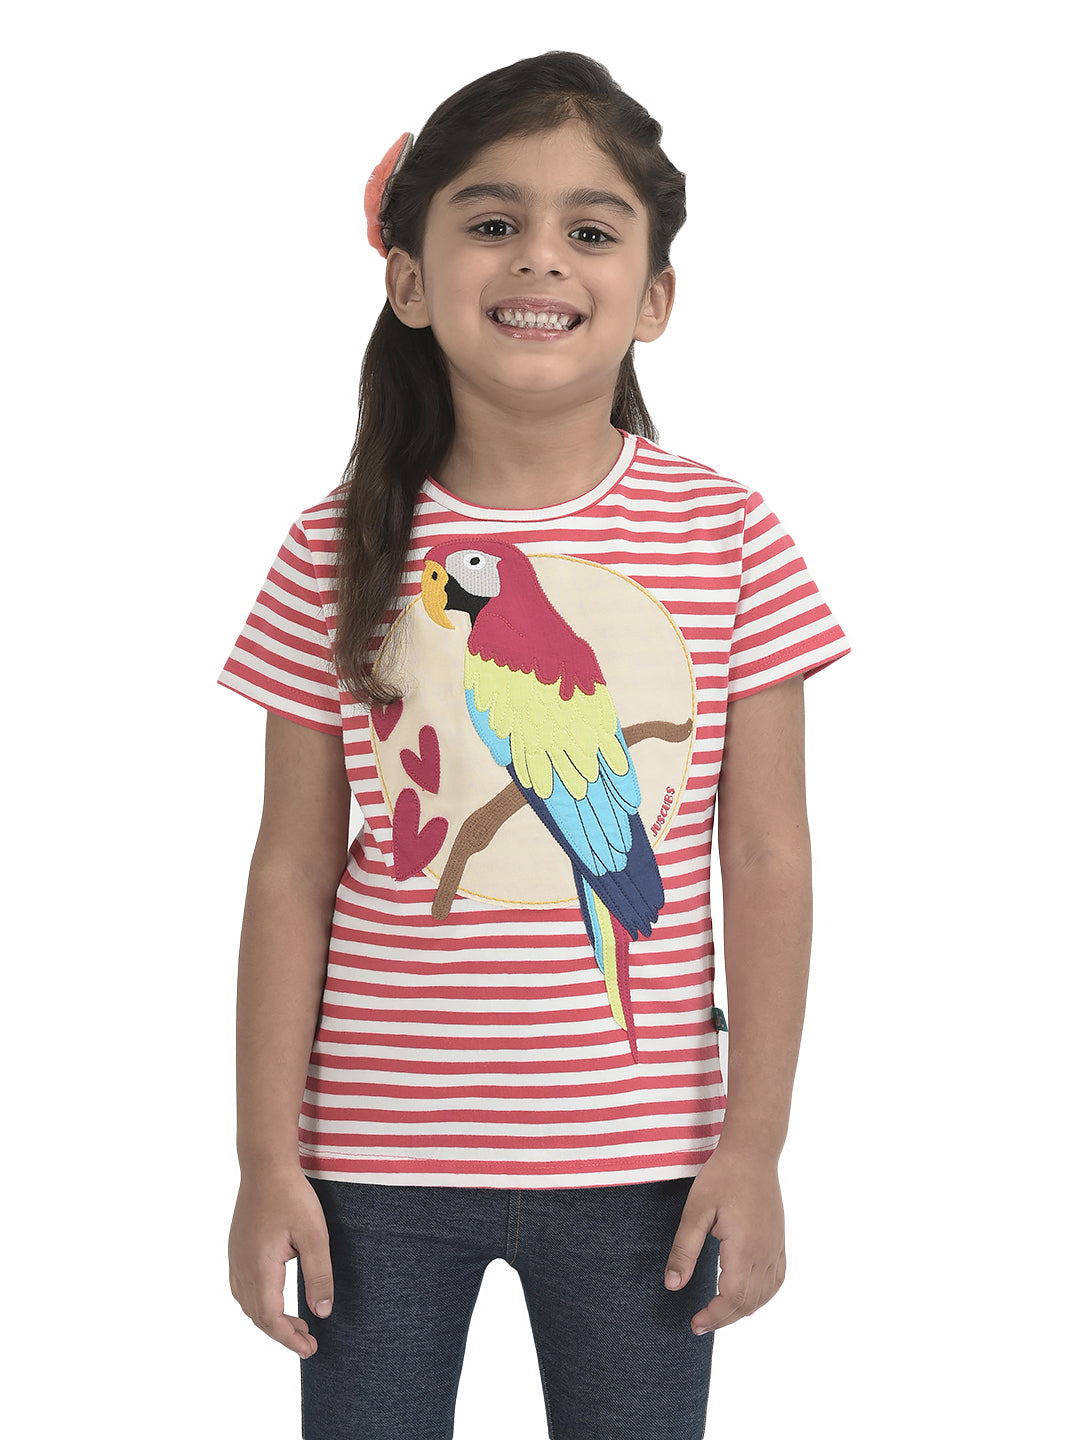 Girls Embroidery & Patch work Parrot Bio-Washed T-shirt - Pink & Navy